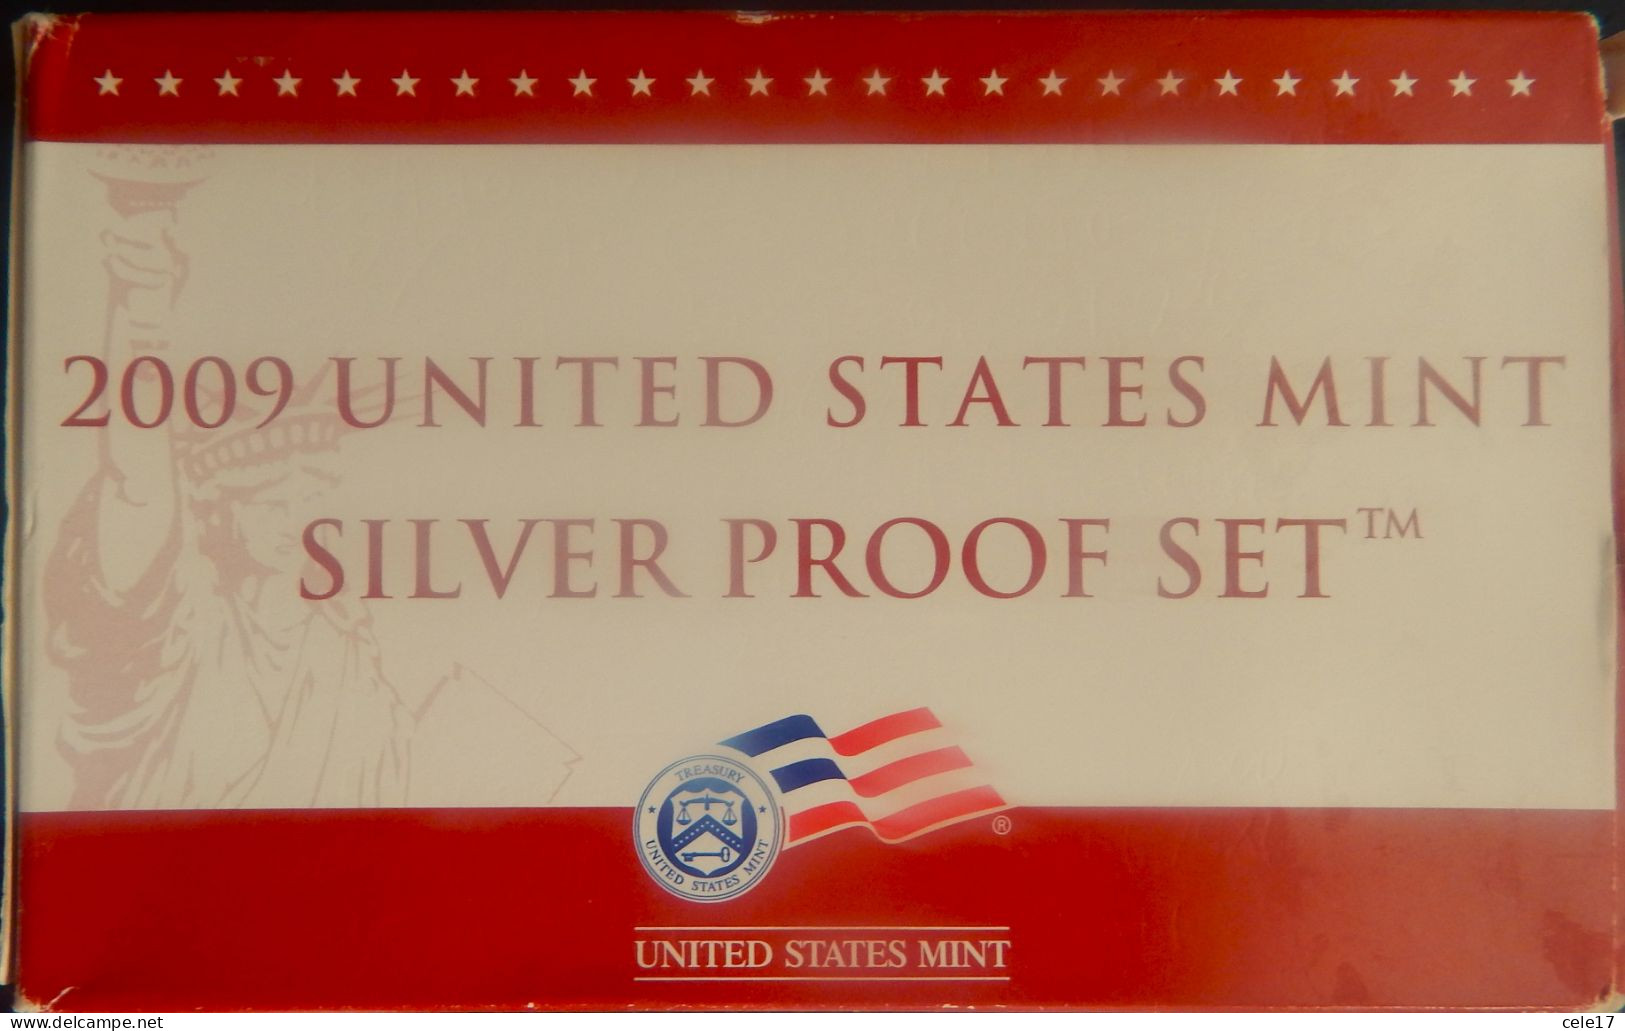 UNITED STATE MINT SILVER PROOF SET 2009 - Denmark